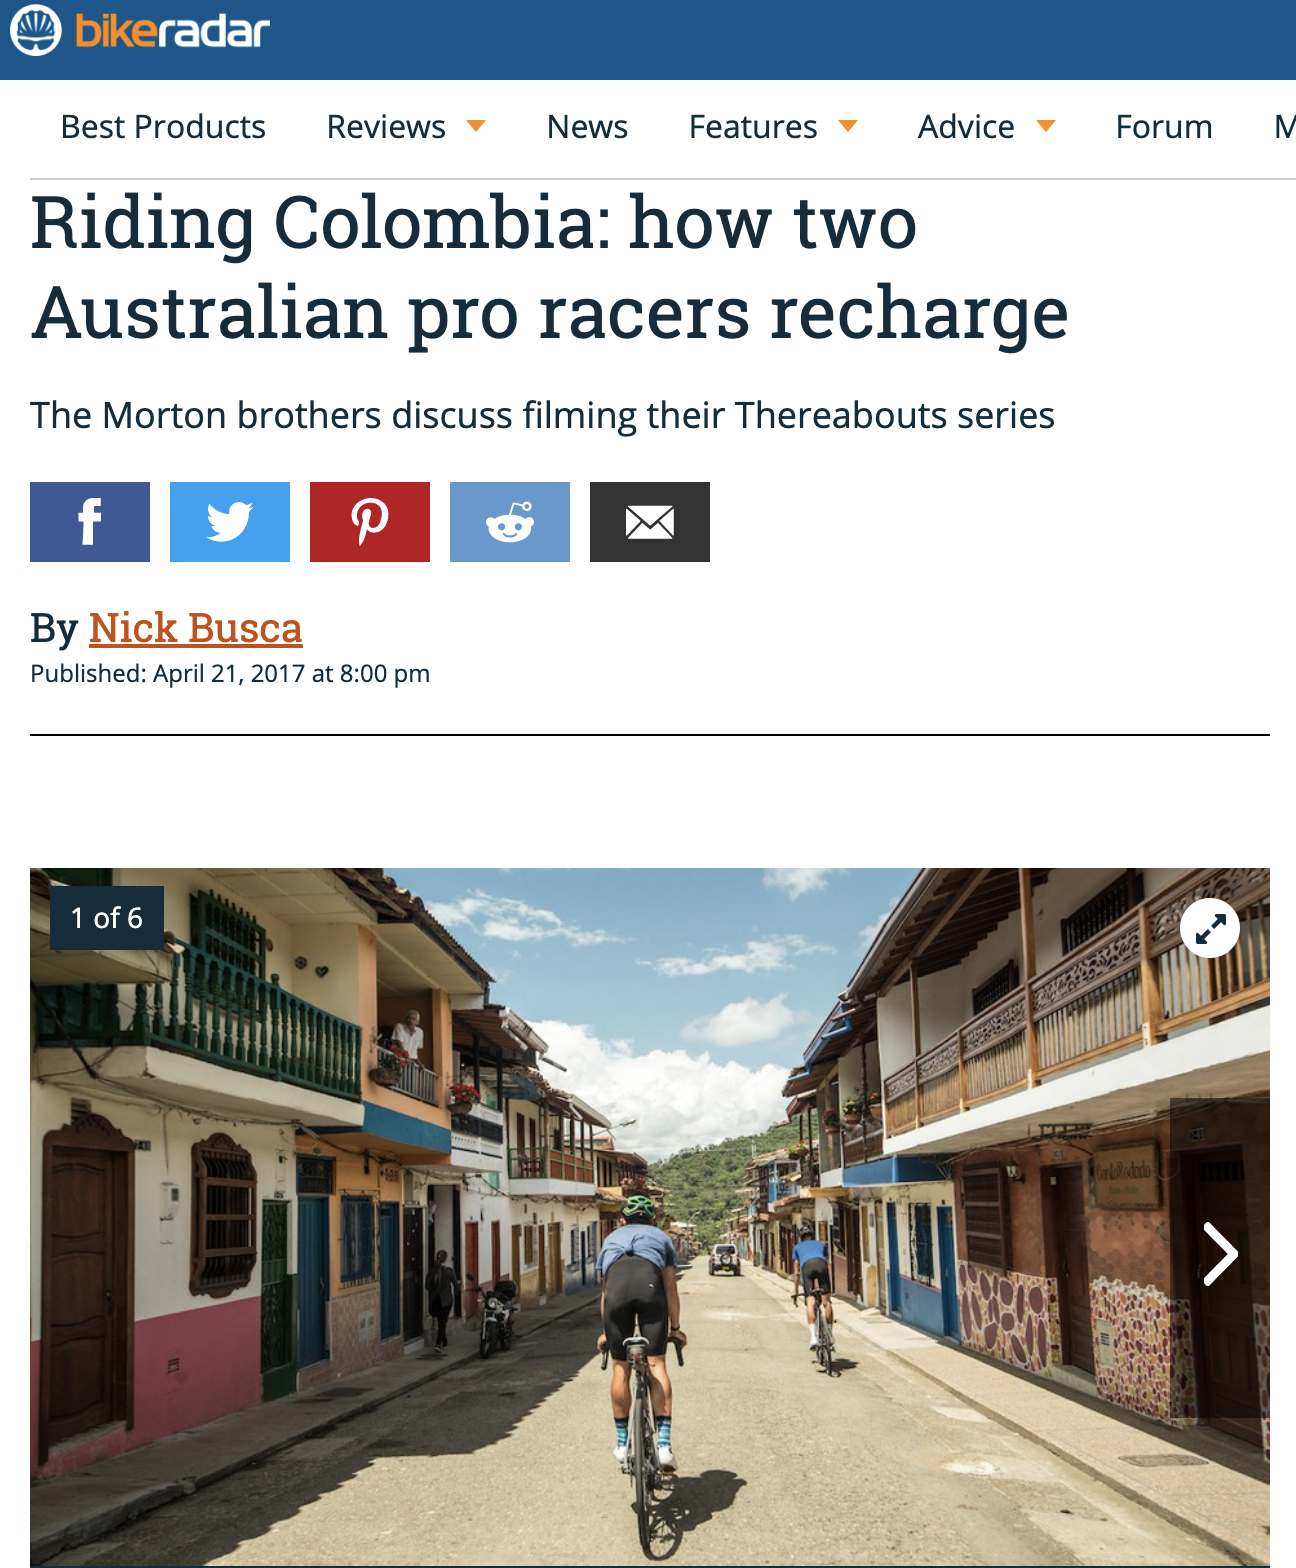 Riding Colombia: how two Australian pro racers recharge